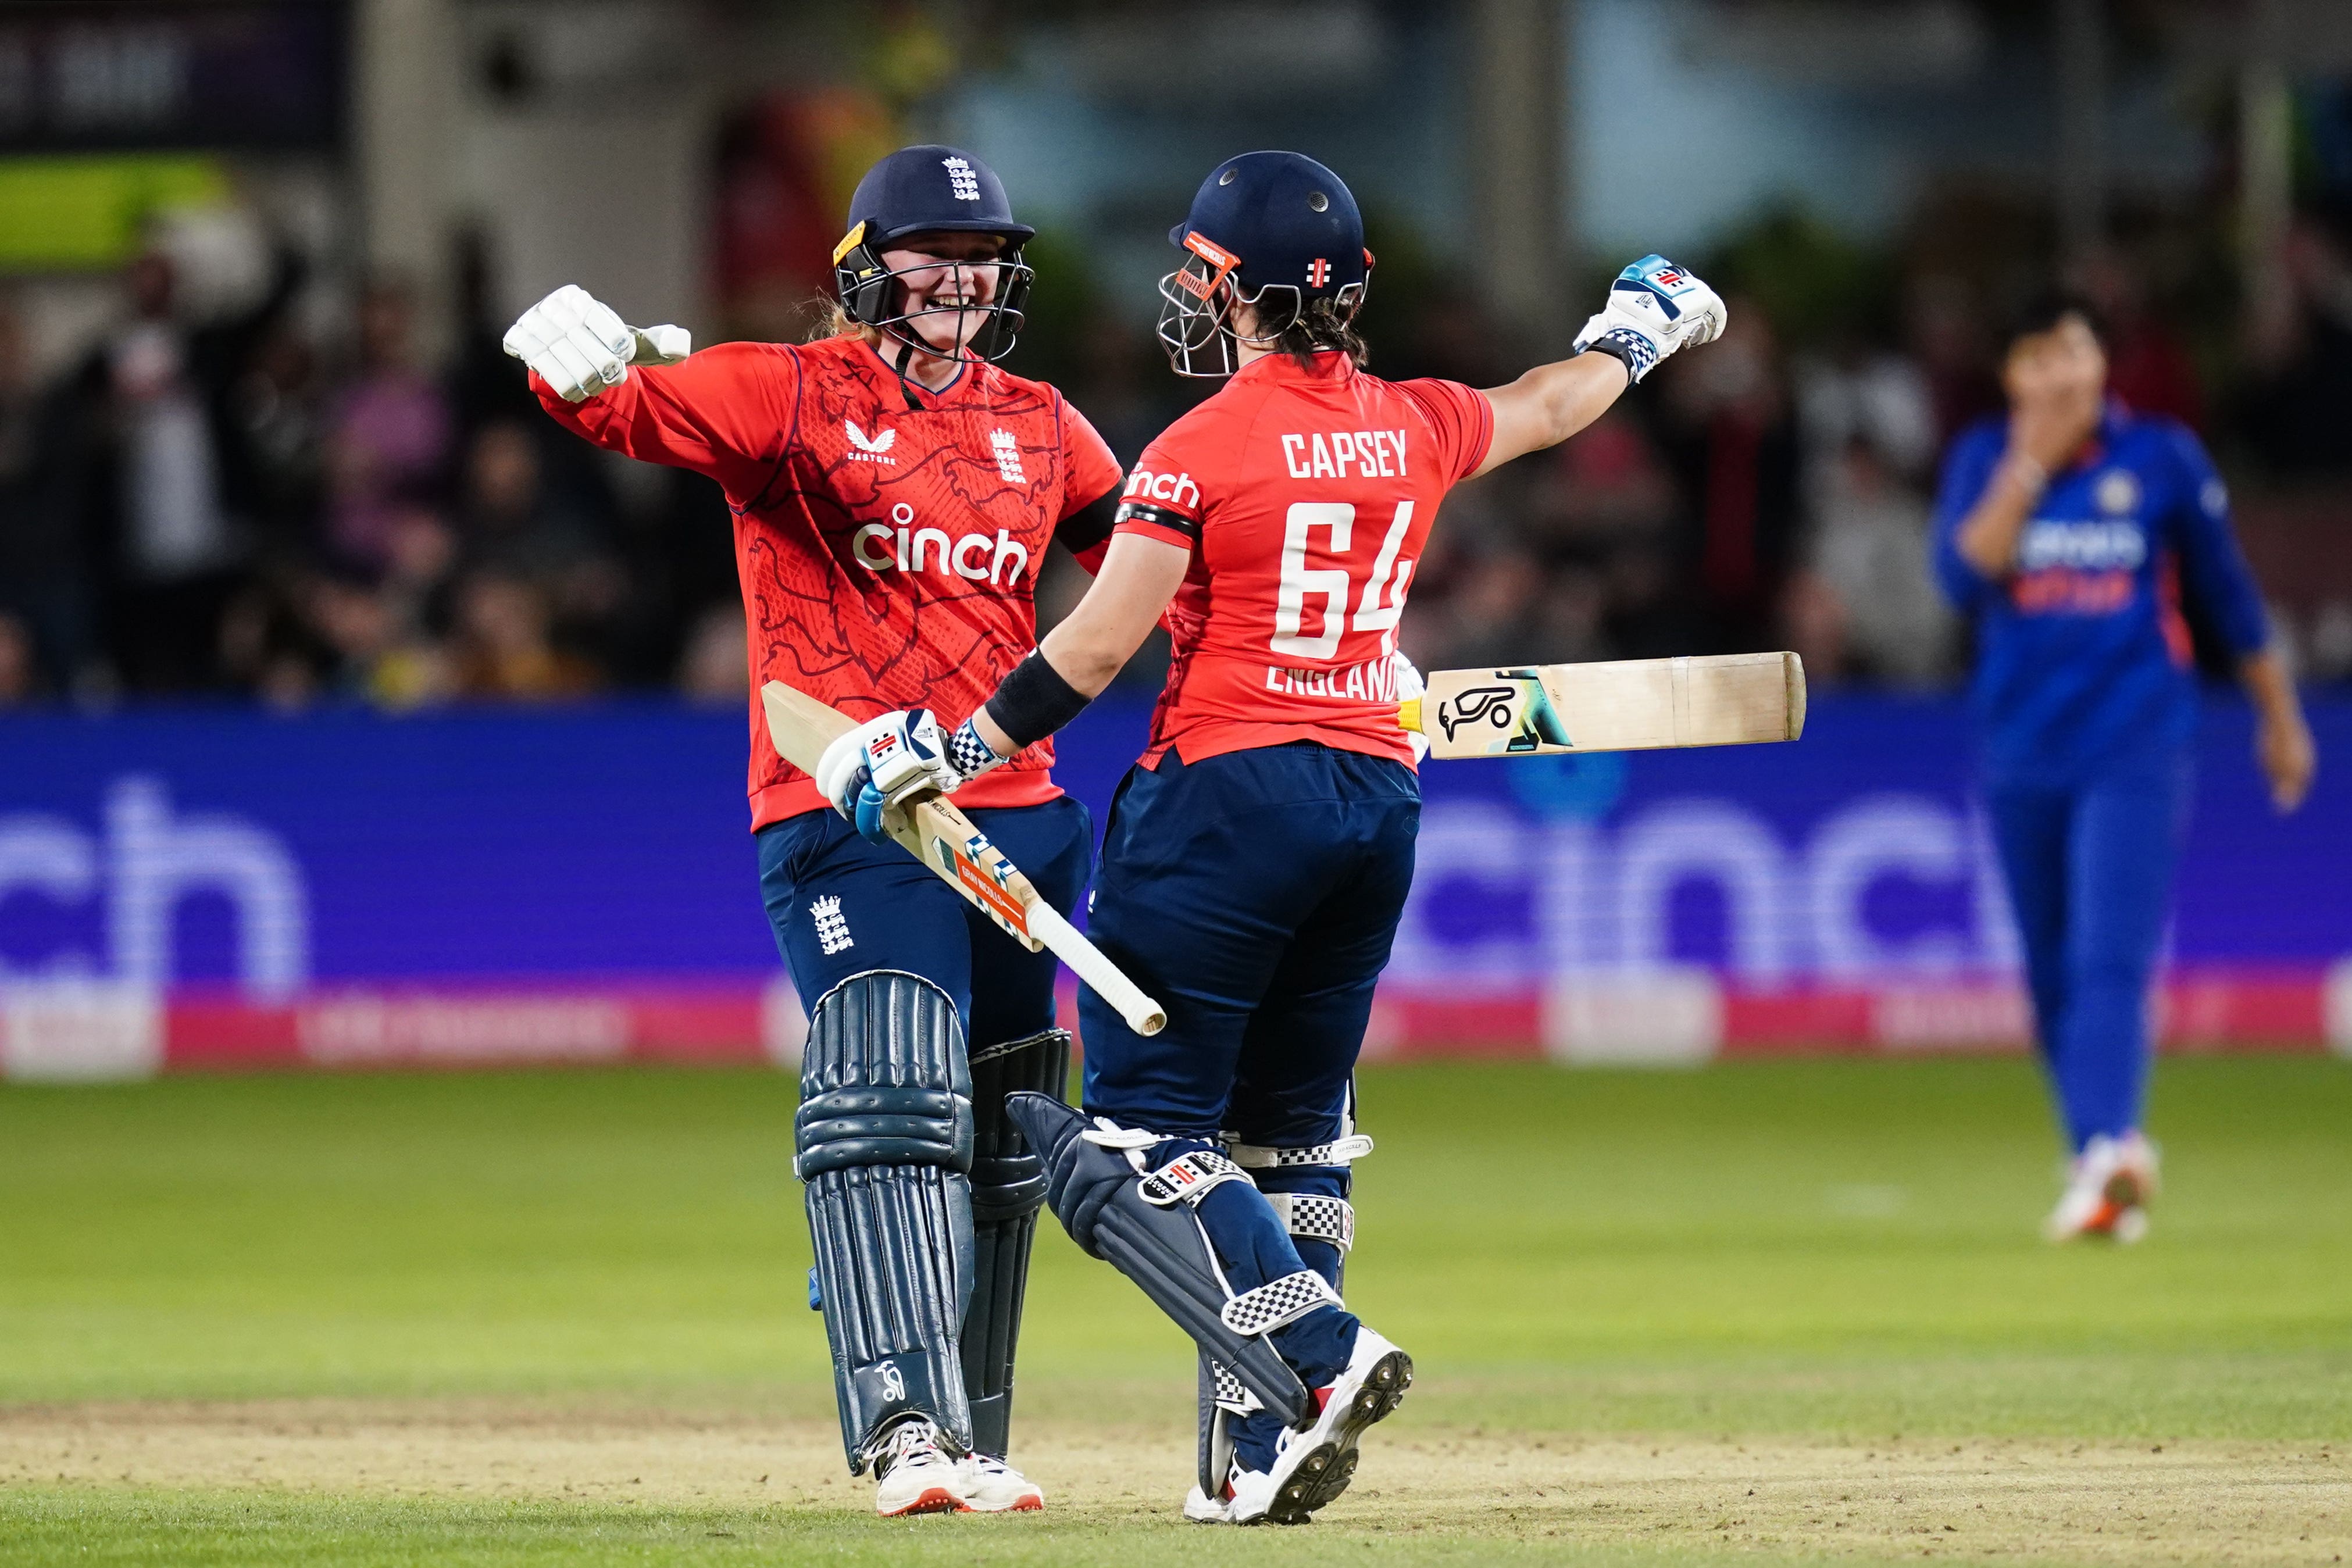 England finish T20 series against West Indies with perfect record (David Davies/PA)